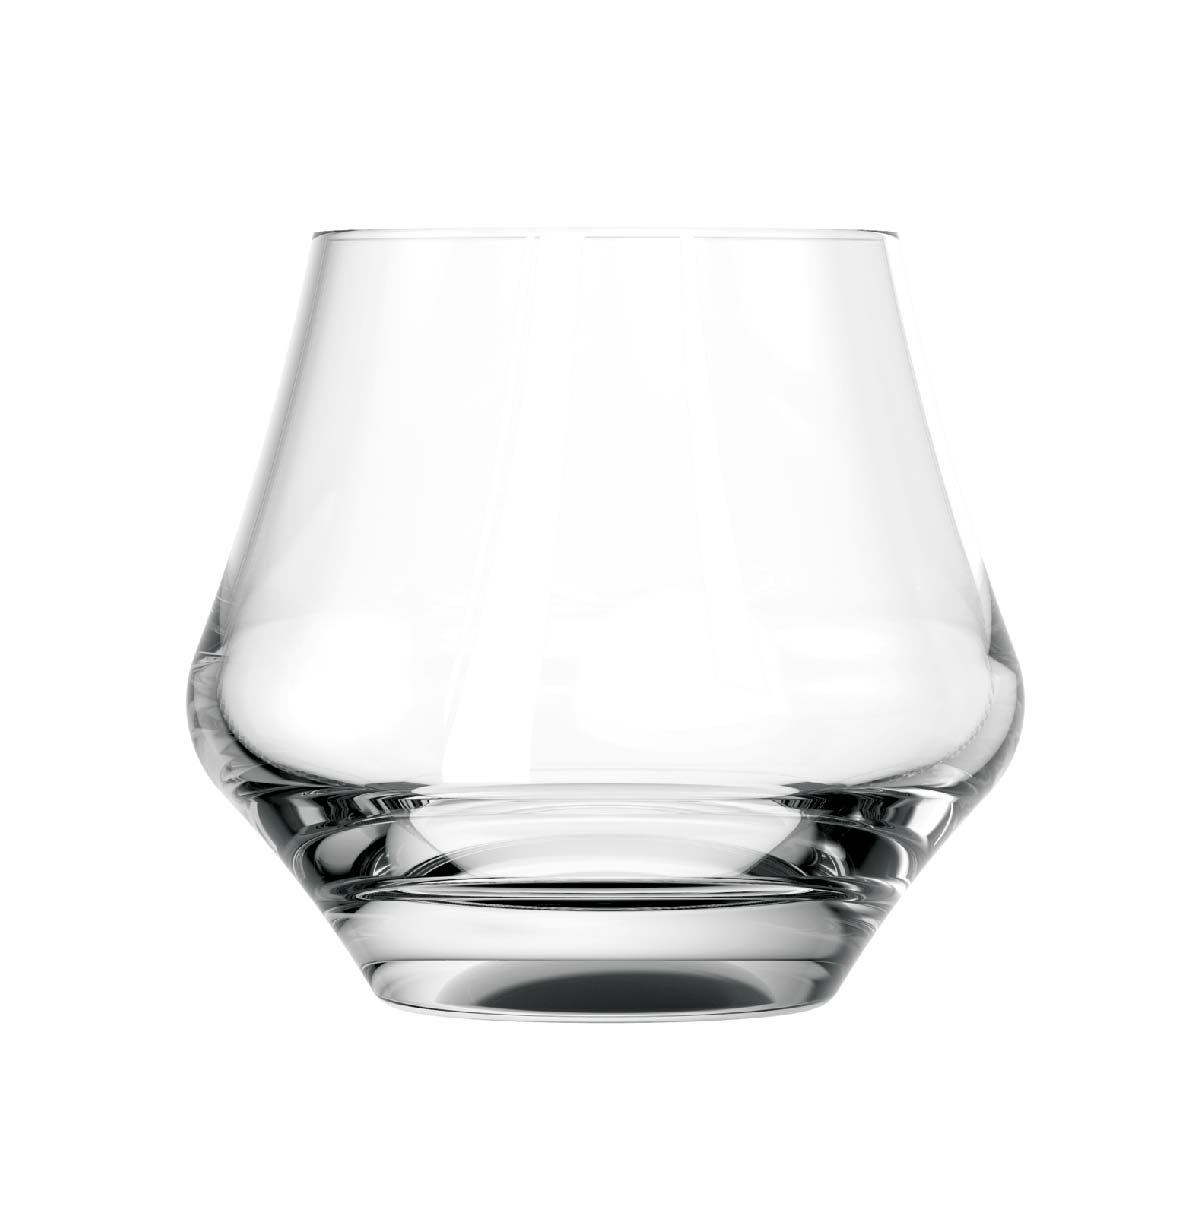 Double Old Fashioned Glas, Royal Leerdam Arome - 350ml